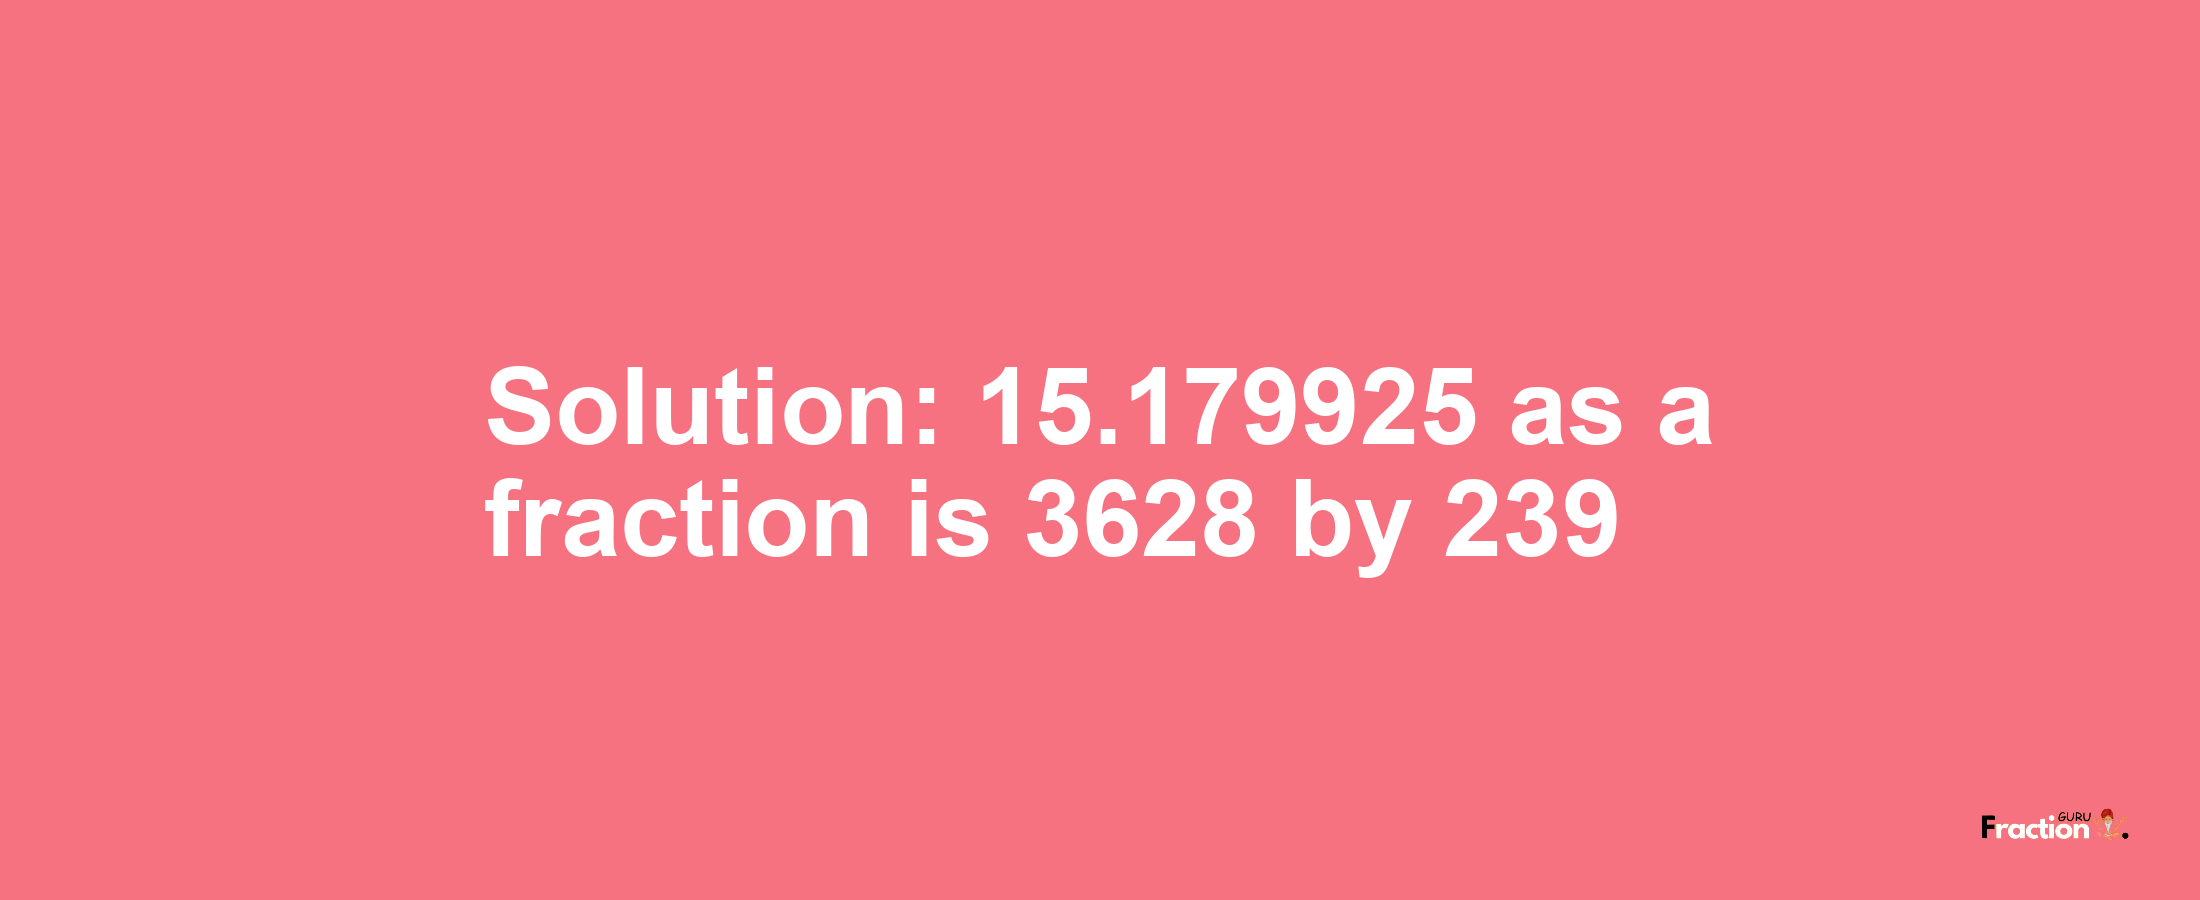 Solution:15.179925 as a fraction is 3628/239